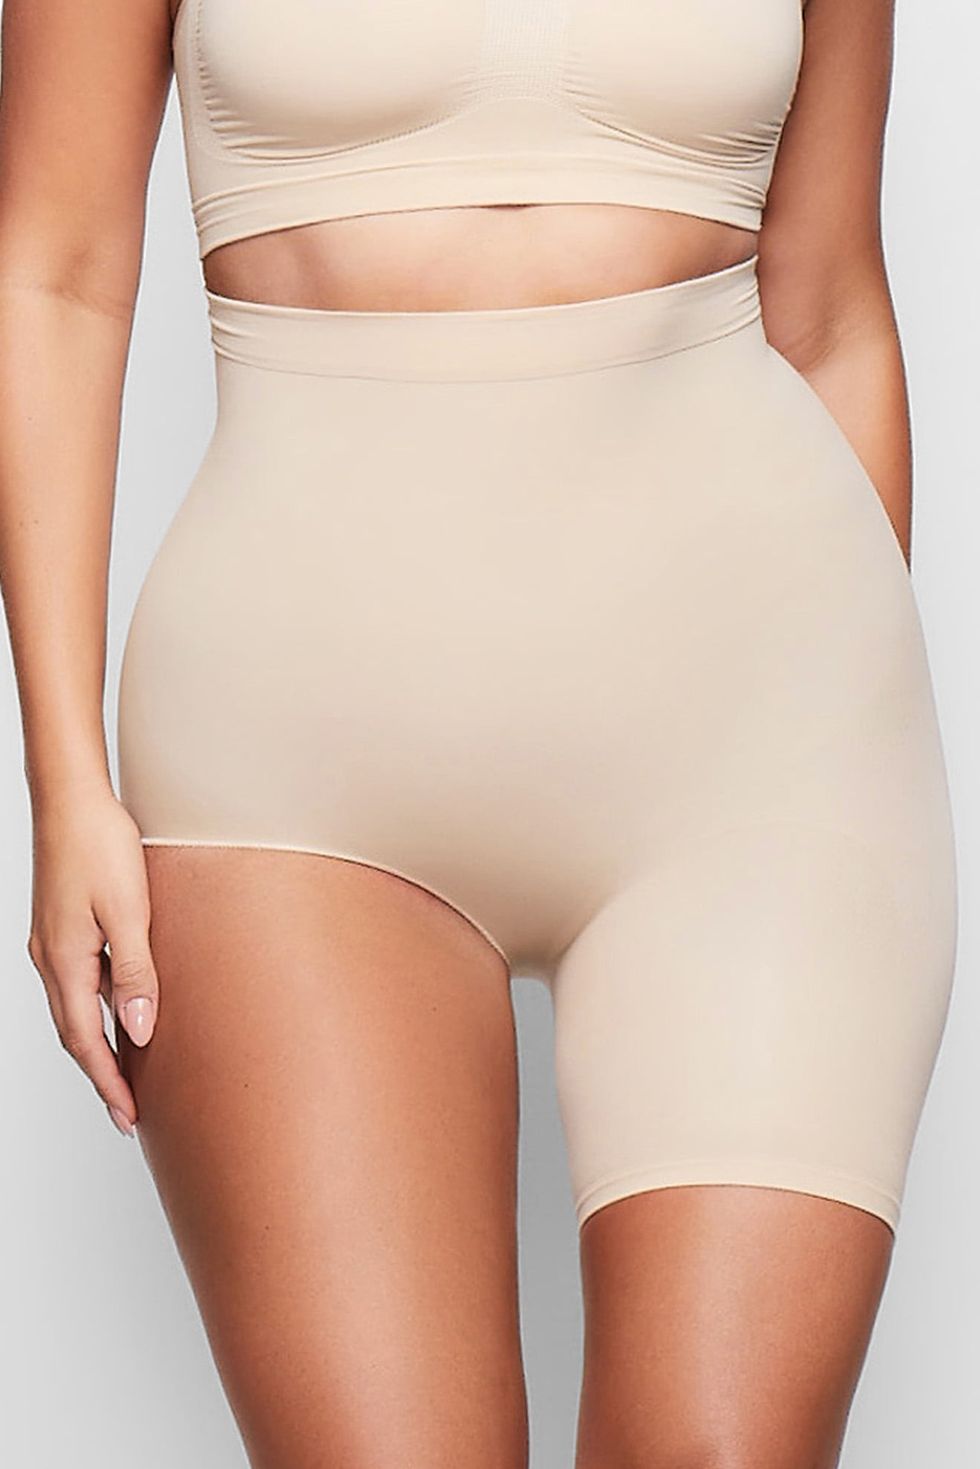 What to Expect From Kim Kardashian's Shapewear Launch at Nordstrom